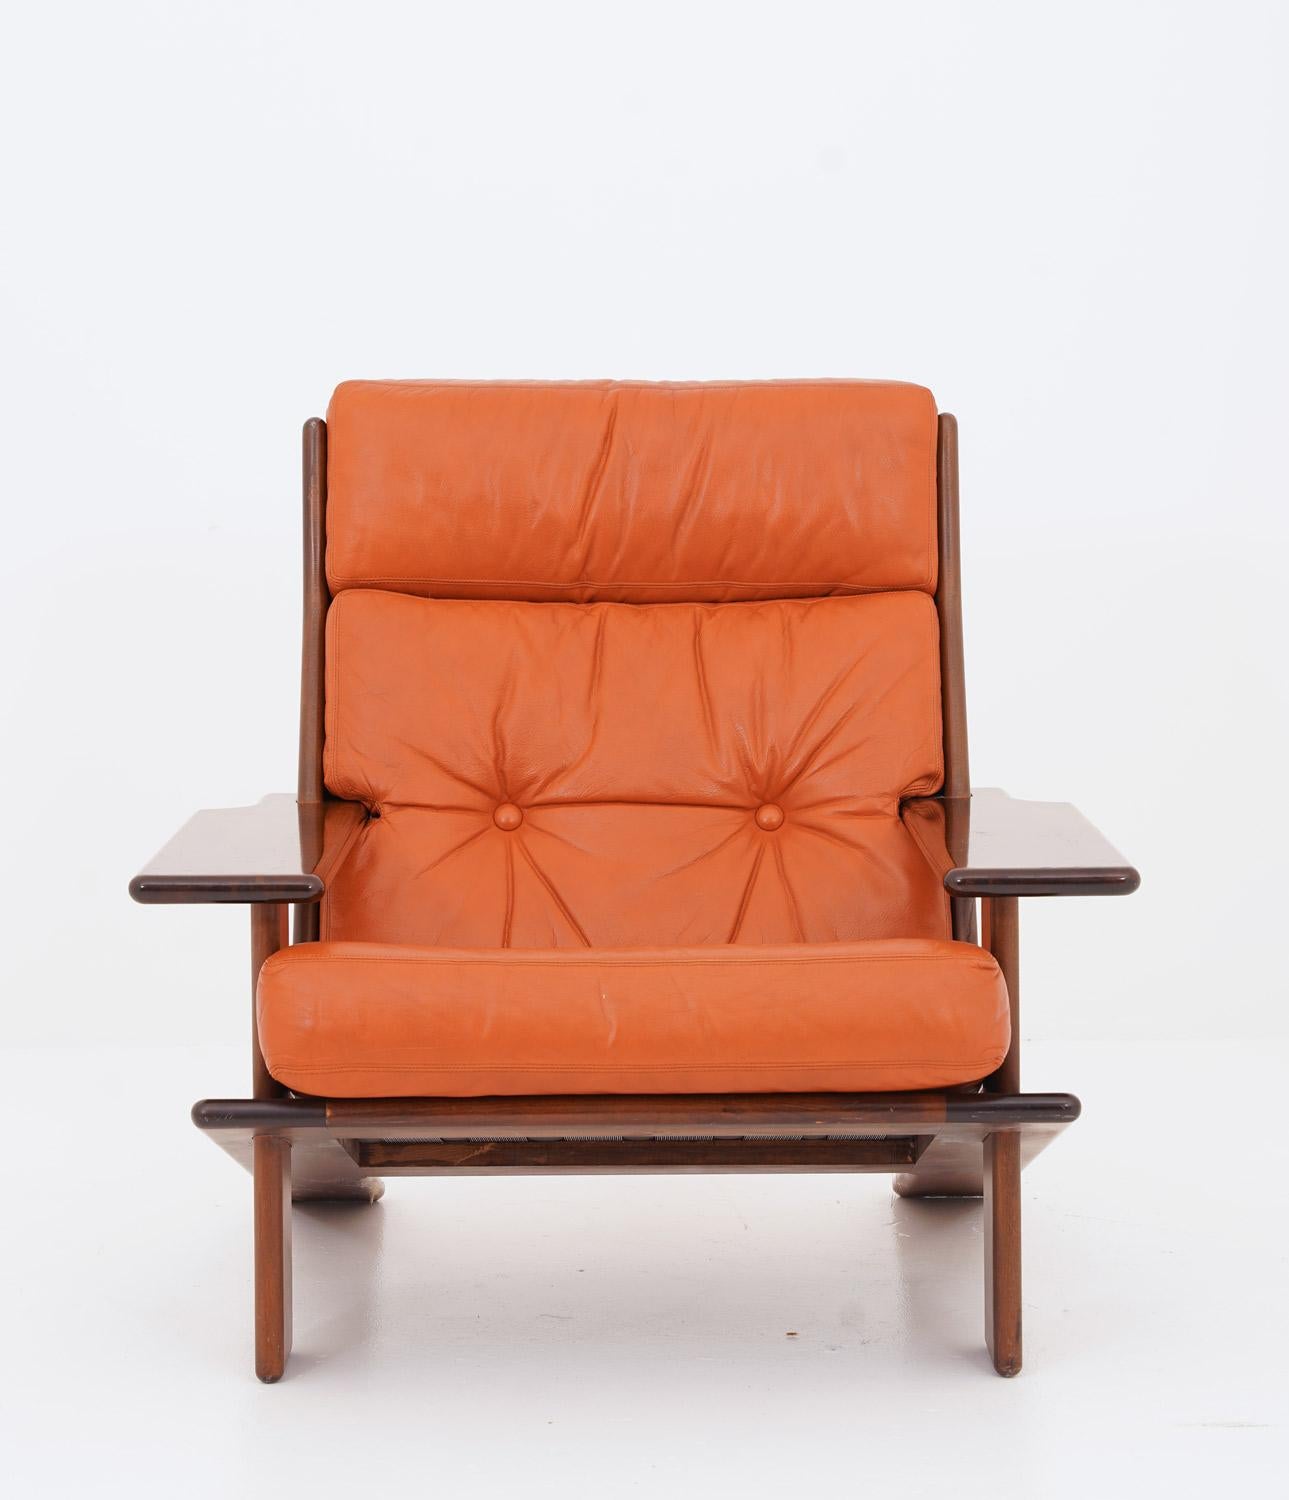 Finnish lounge chairs, model 'Pele' by Esko Pajamies for Lepokalusto, Finland.
This is Pajamies most spectacular chair with its extremely generous proportions and distinct shapes.
Matching sofa also available!

Condition: The frames are in close to